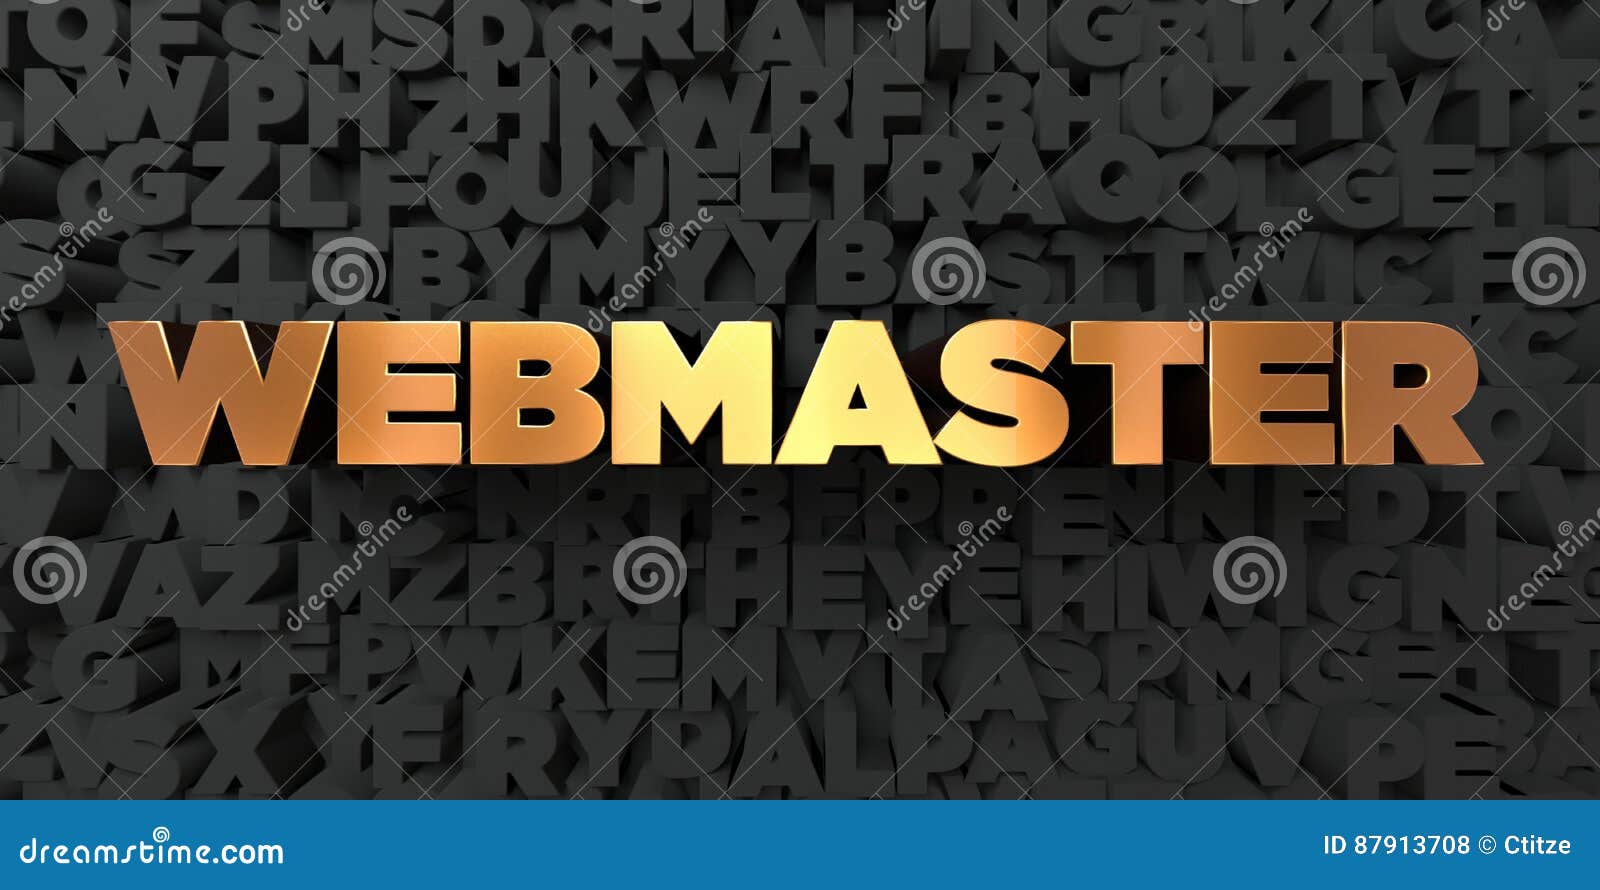 webmaster - gold text on black background - 3d rendered royalty free stock picture